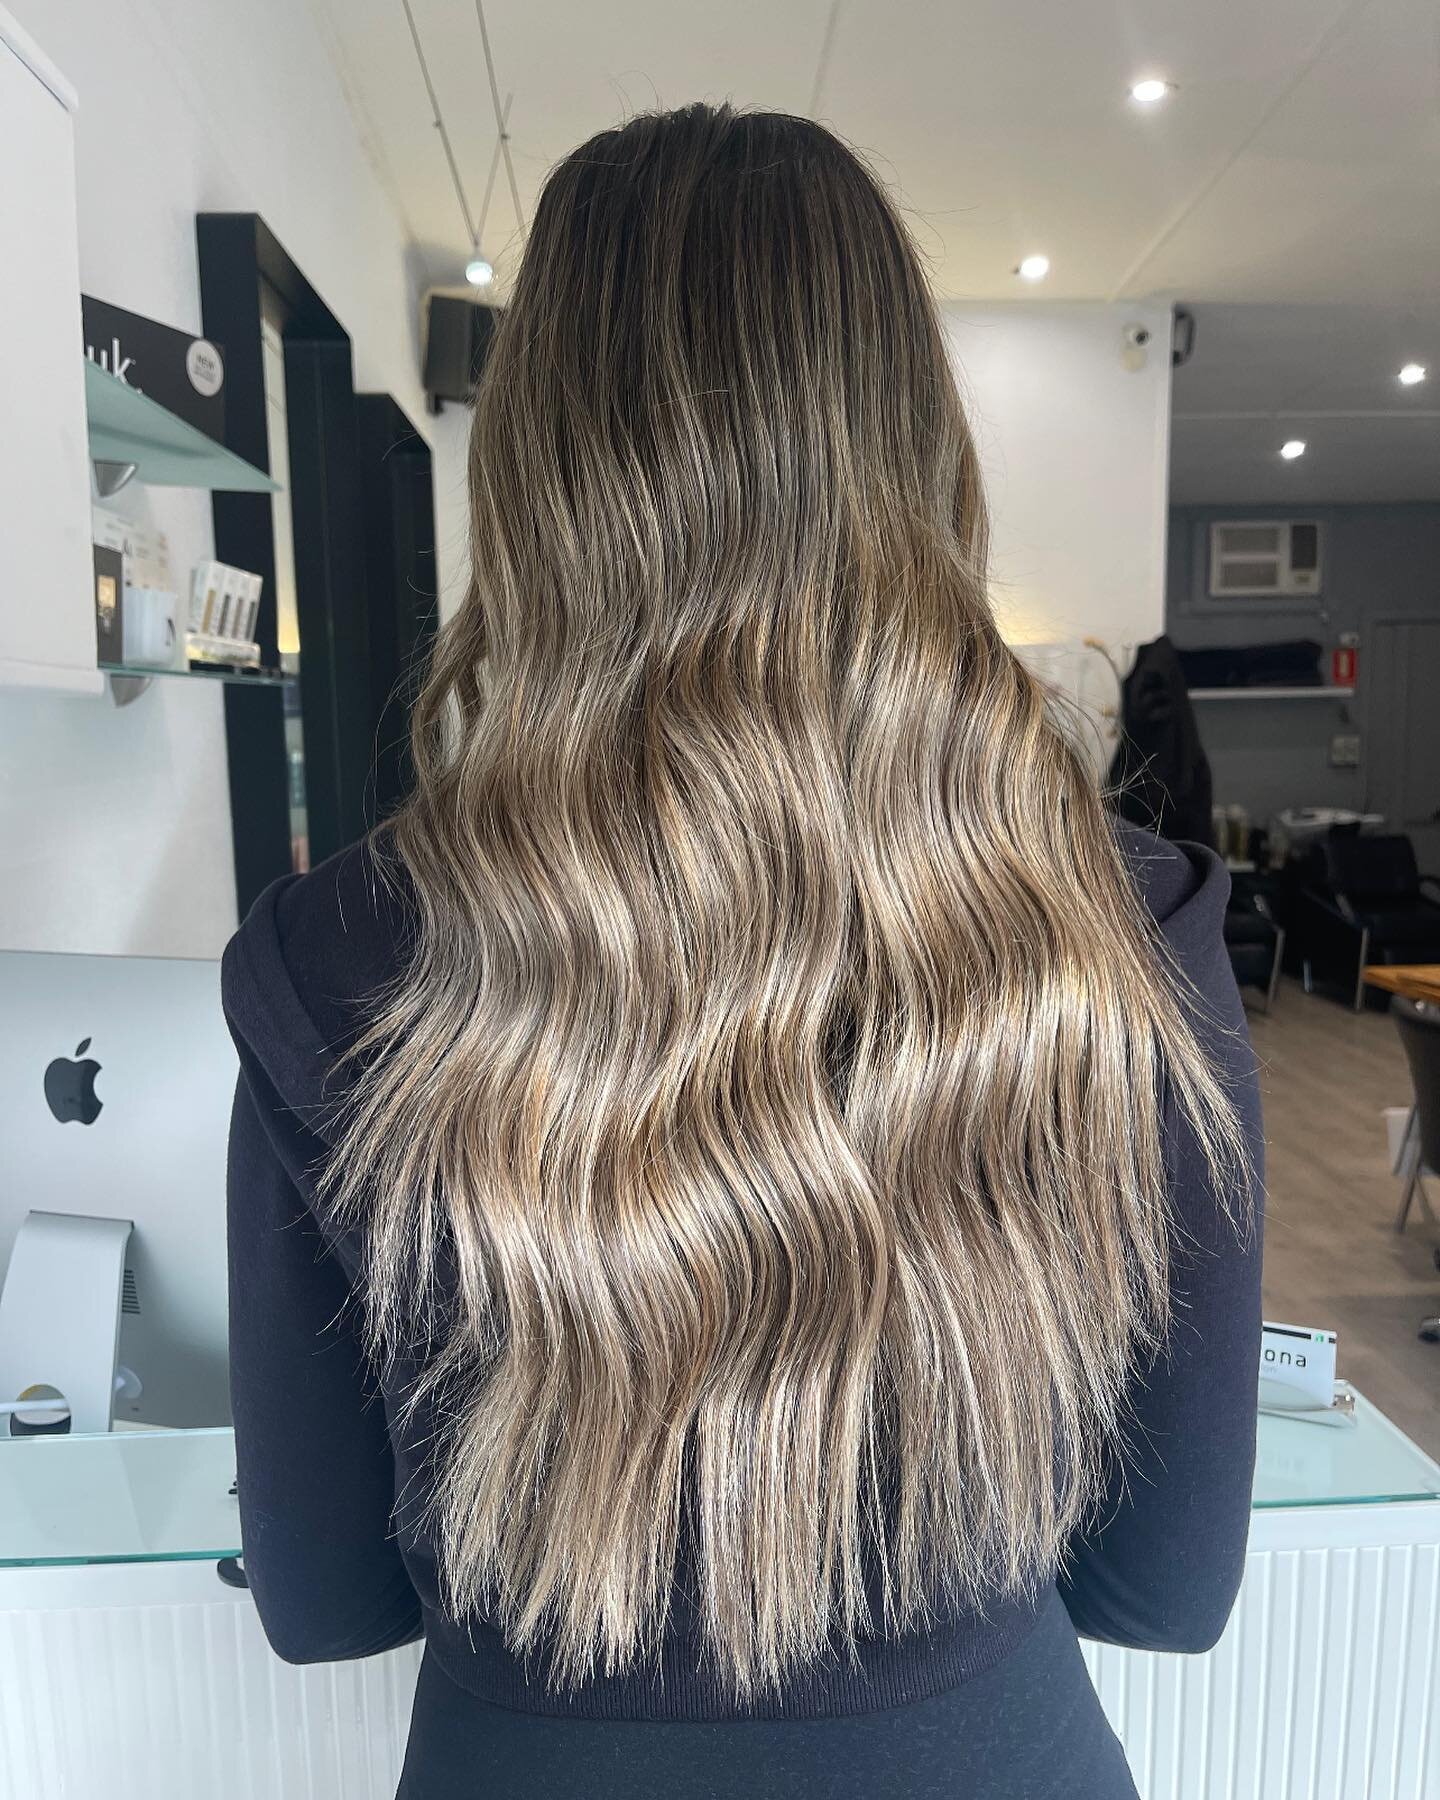 Amazing winter balayage created by our main colorists 🎨 Darcy. #wella #wellahair #wellacolour #softwaves #winterready #stunningresults #blondeends